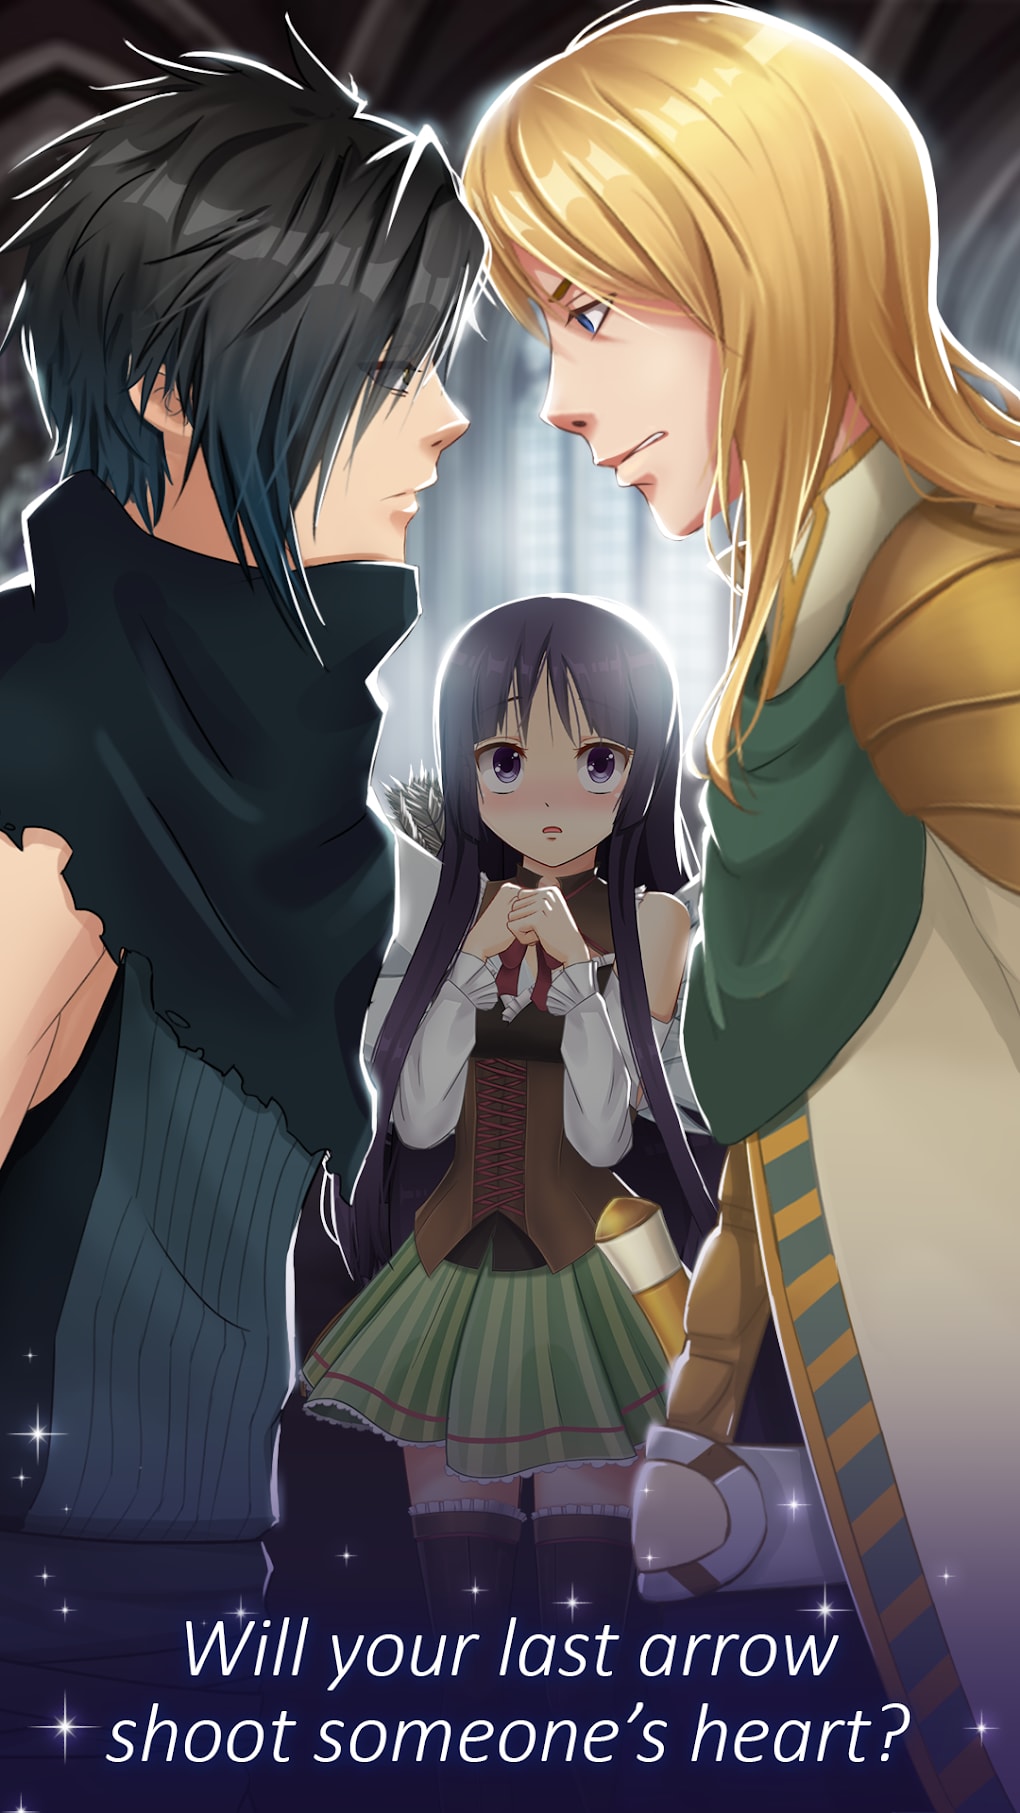 Anime Love Story Games: Shadowtime cho Android - Tải về